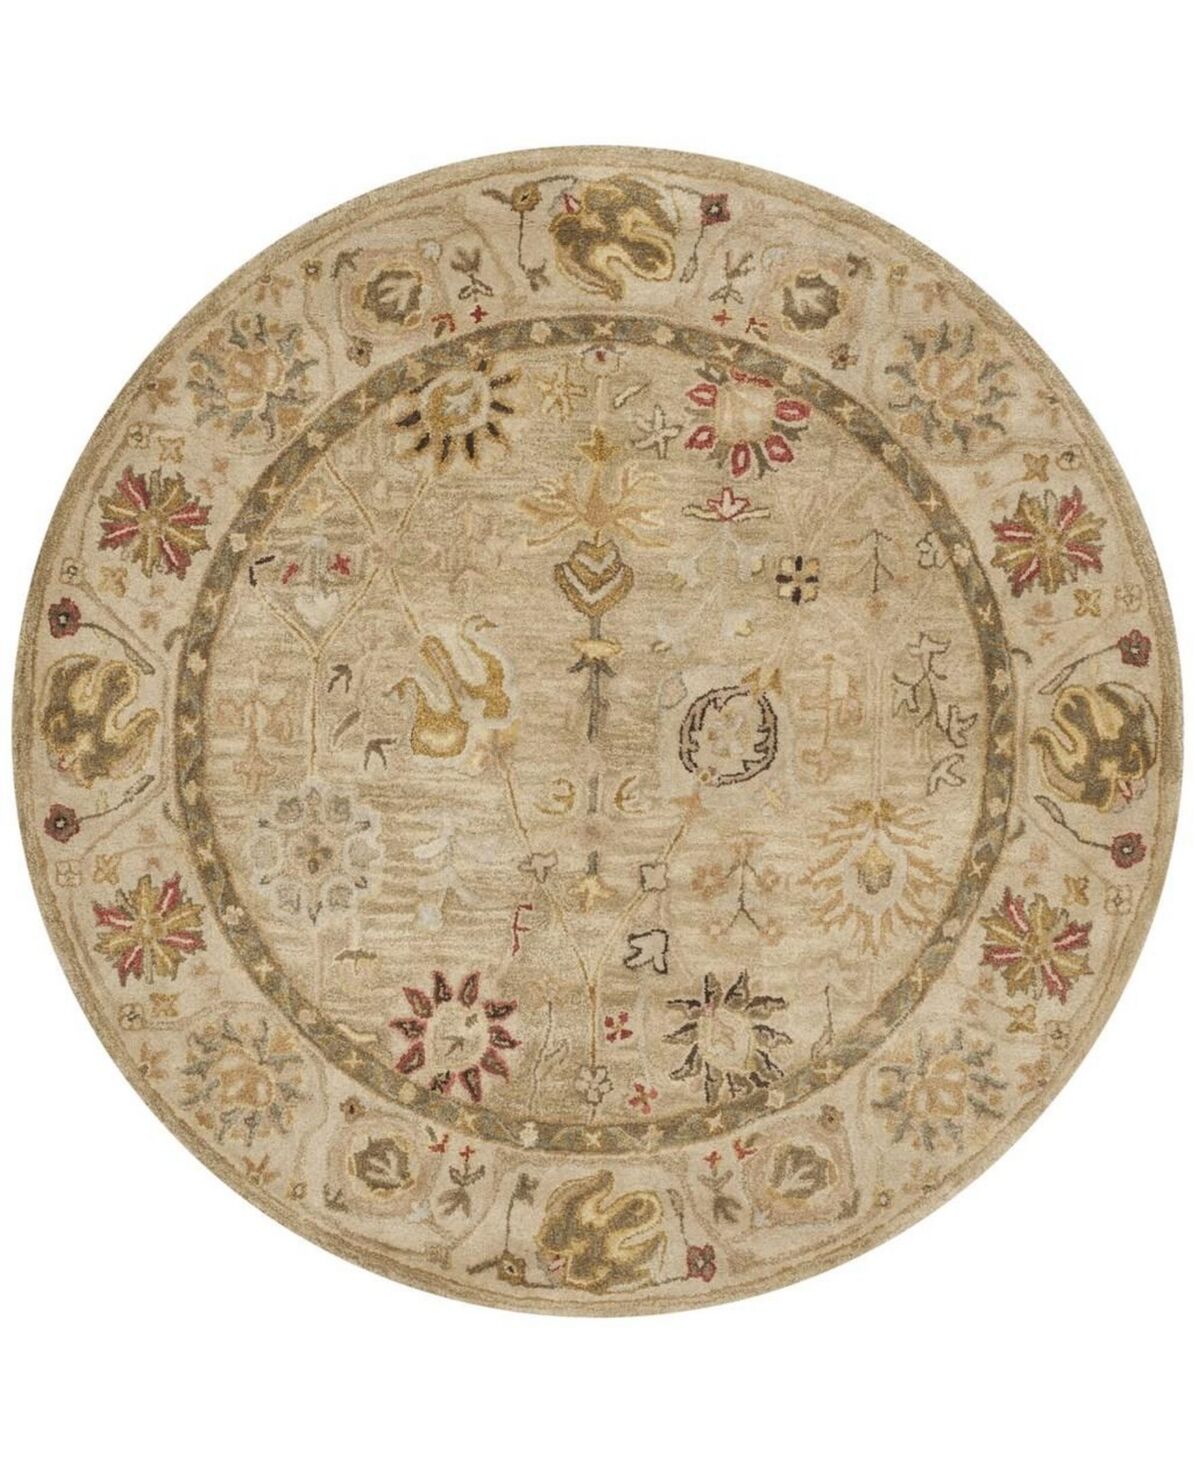 Safavieh Antiquity At859 Taupe 6' x 6' Round Area Rug - Taupe